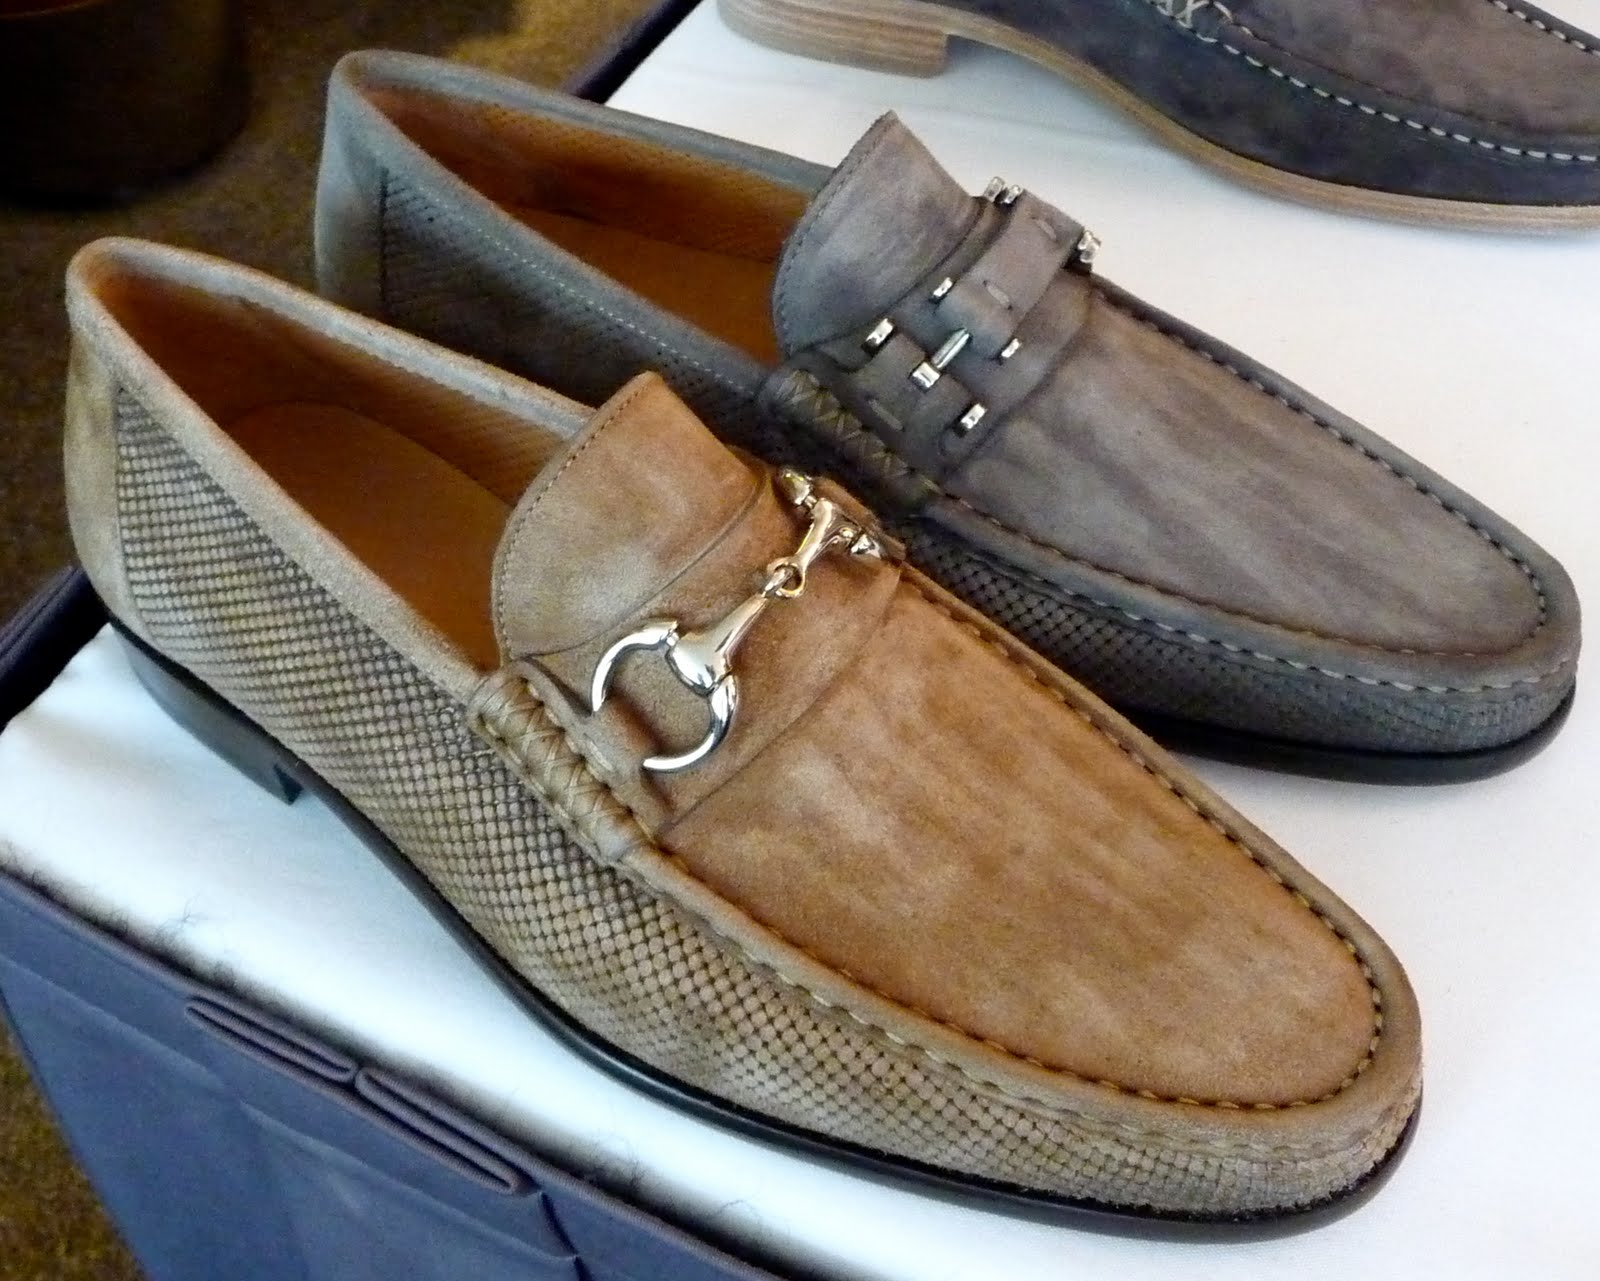 MAGNANNI SHOES FOR MEN PRE-SPRING & SPRING 2011 COLLECTIONS